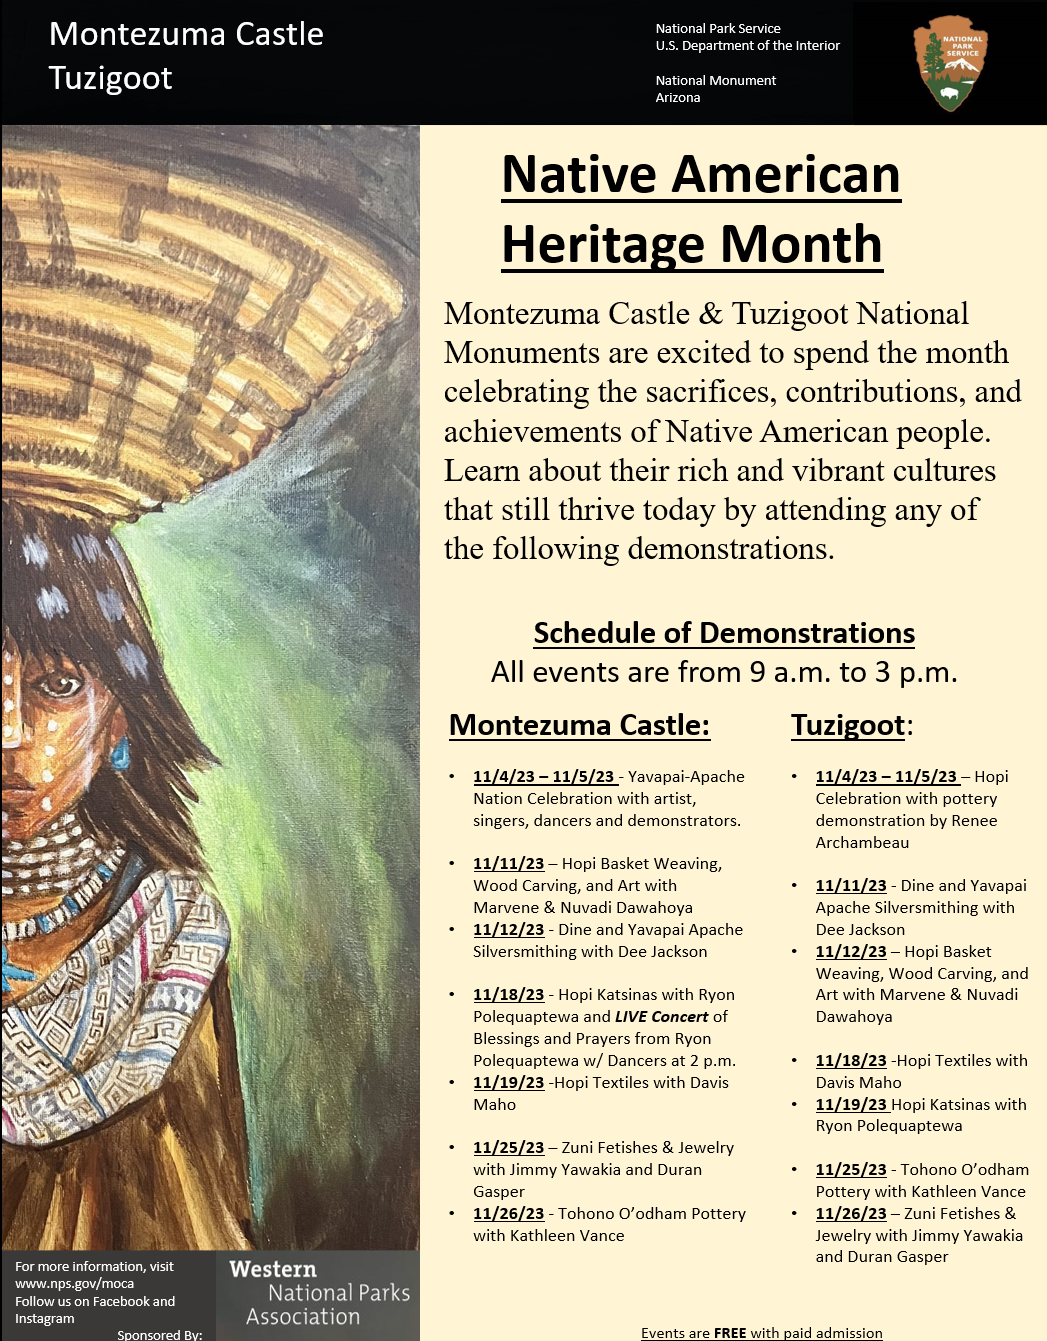 Native American Heritage Month - NPS Commemorations and